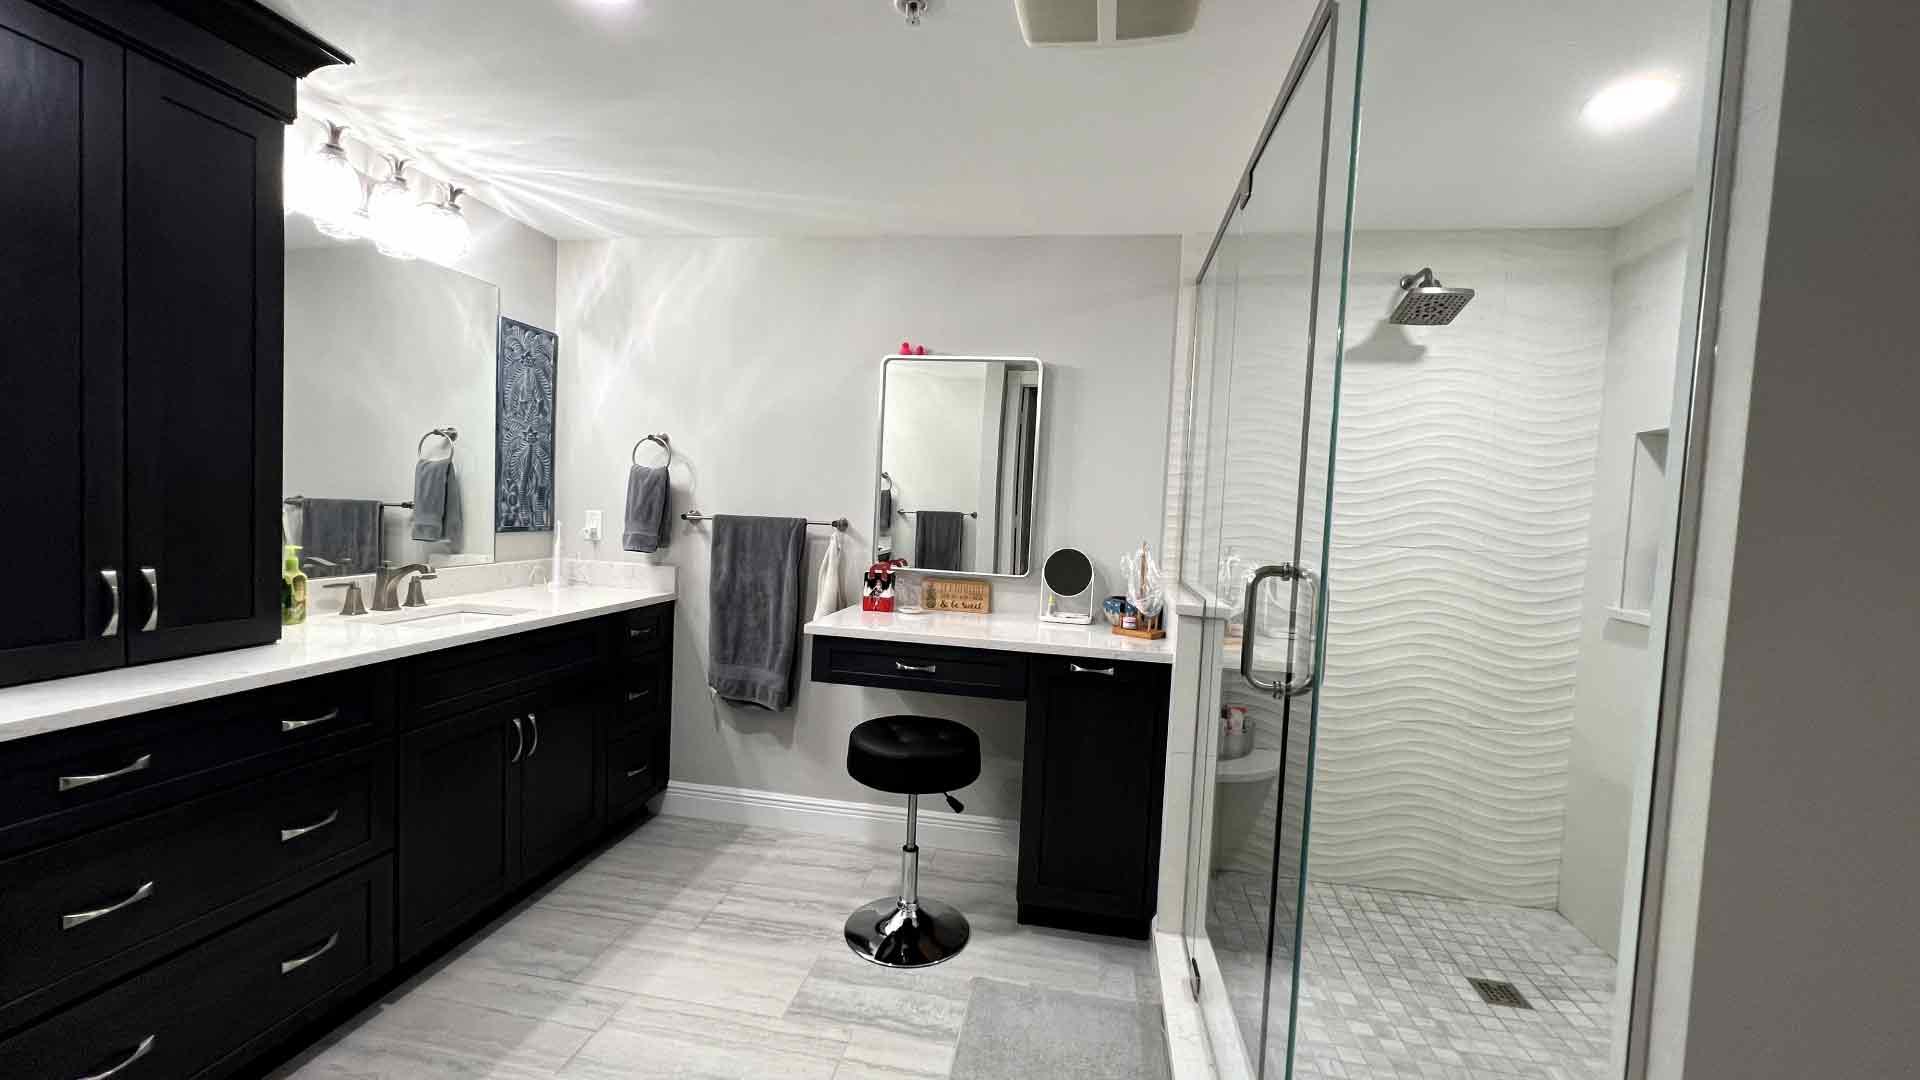 Bathroom - Deep condo cleaning in Cape Coral by Goldmillio - Apr 21 | https://www.google.com/maps/place/?cid=2863543821522134674